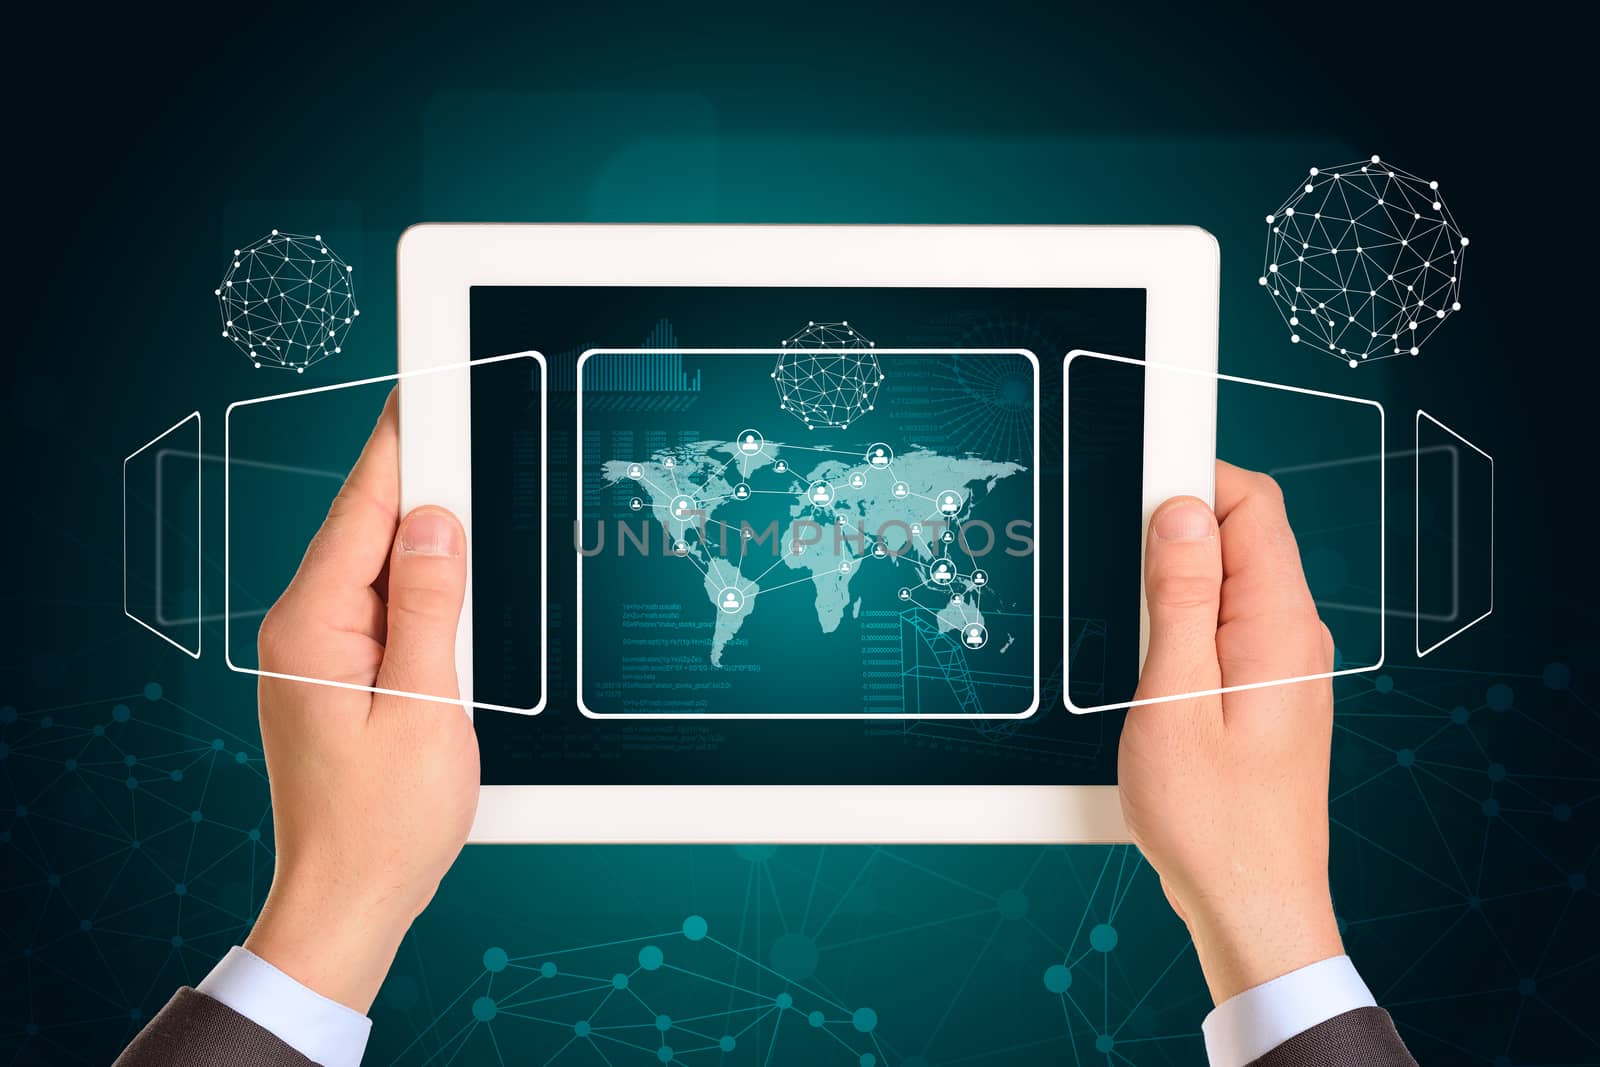 Man hands using tablet pc. Image of world map and network on tablet screen